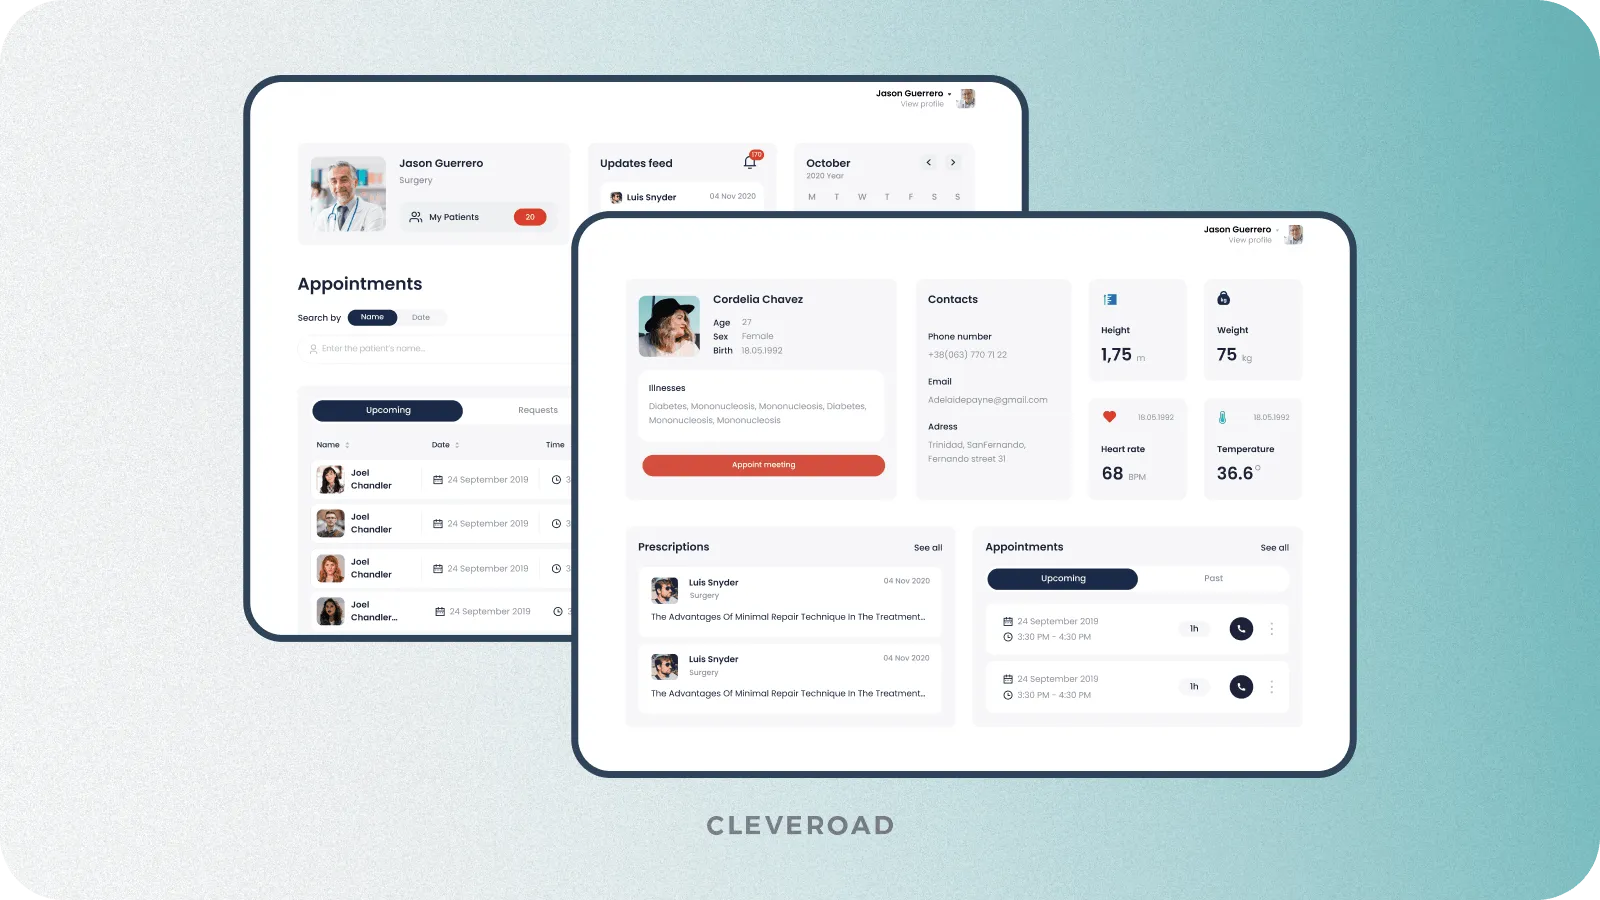 Clinic management system developed by Cleveroad